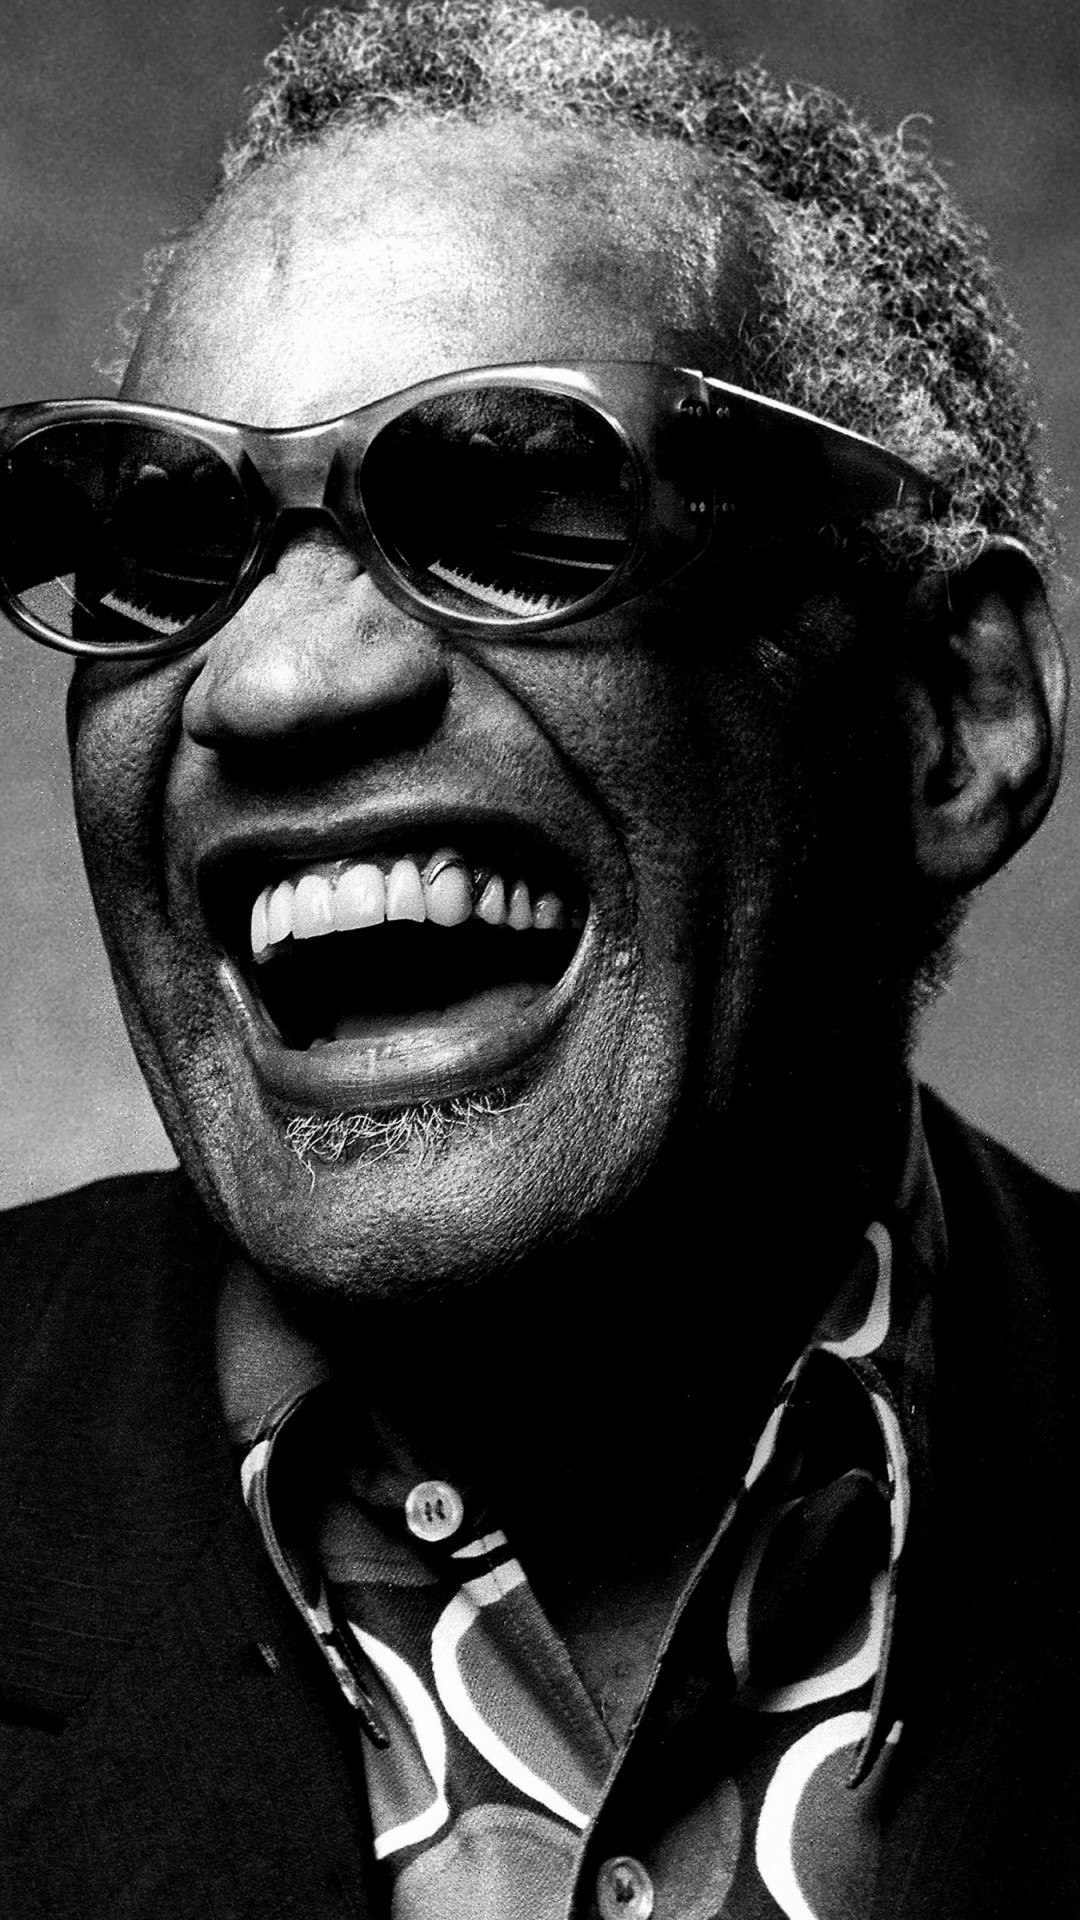 Ray Charles Portrait in Black & White Wallpaper for SONY Xperia Z3